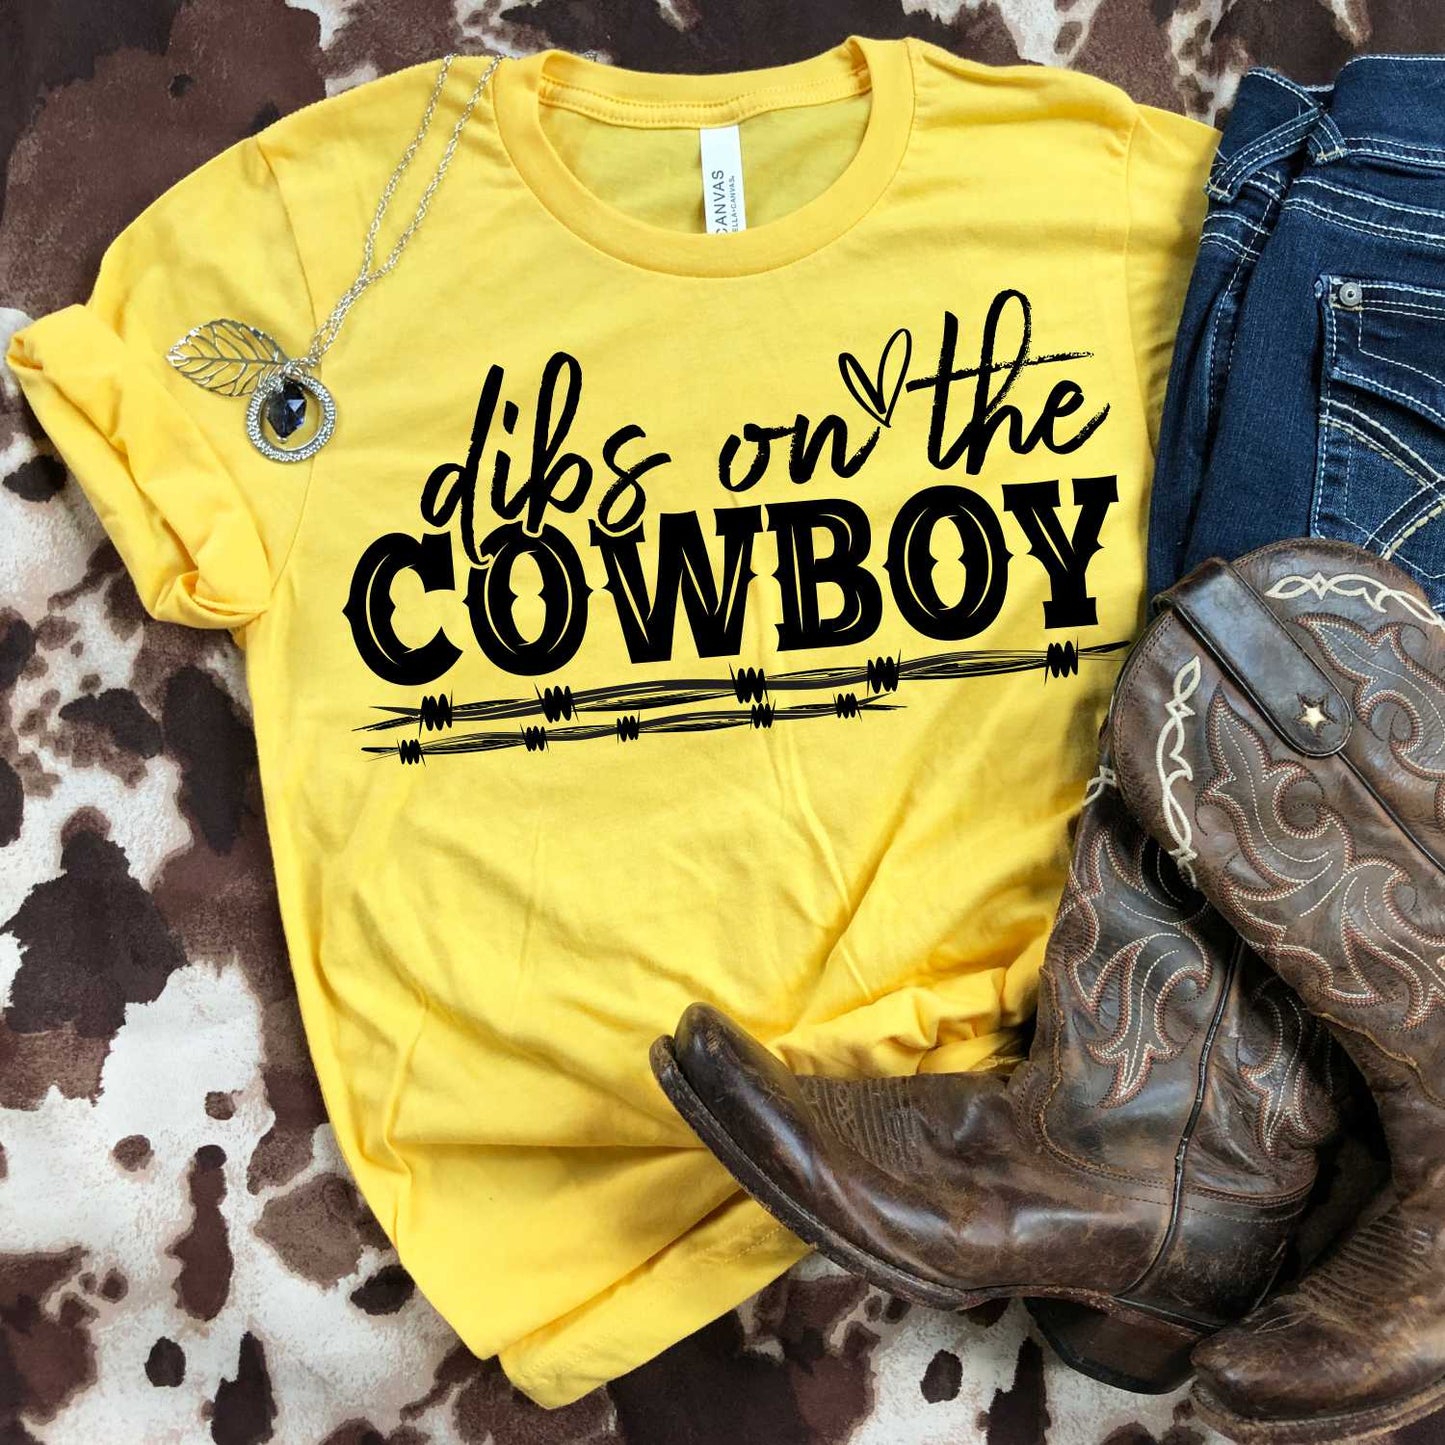 Dibs on the cowboy